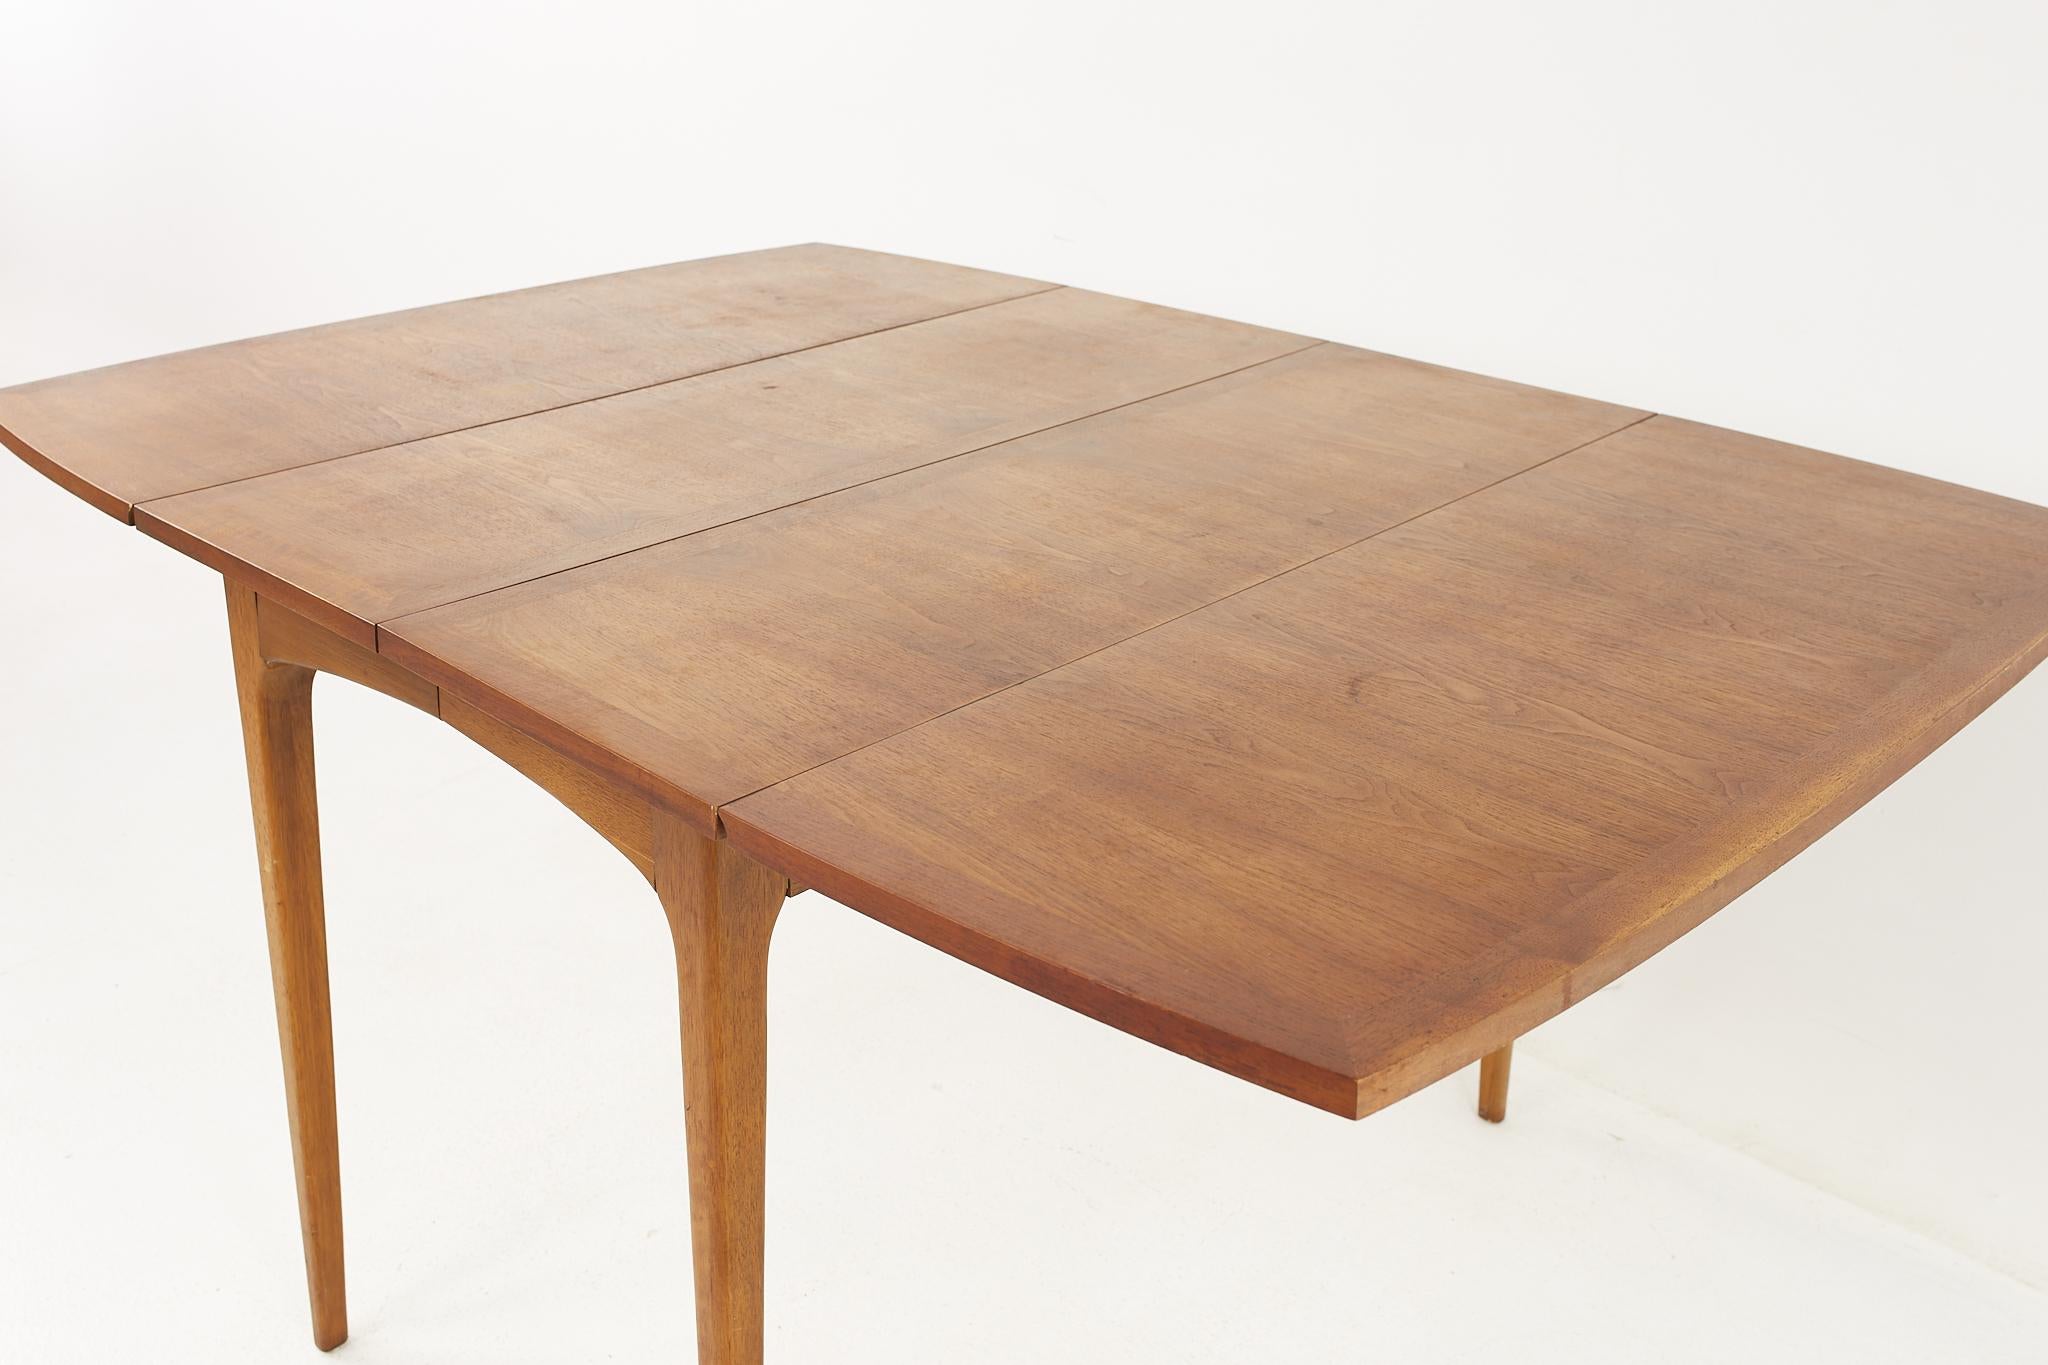 Late 20th Century Lane Rhythm Mid-Century Walnut Drop Leaf Expanding Dining Table with 2 Leaves For Sale